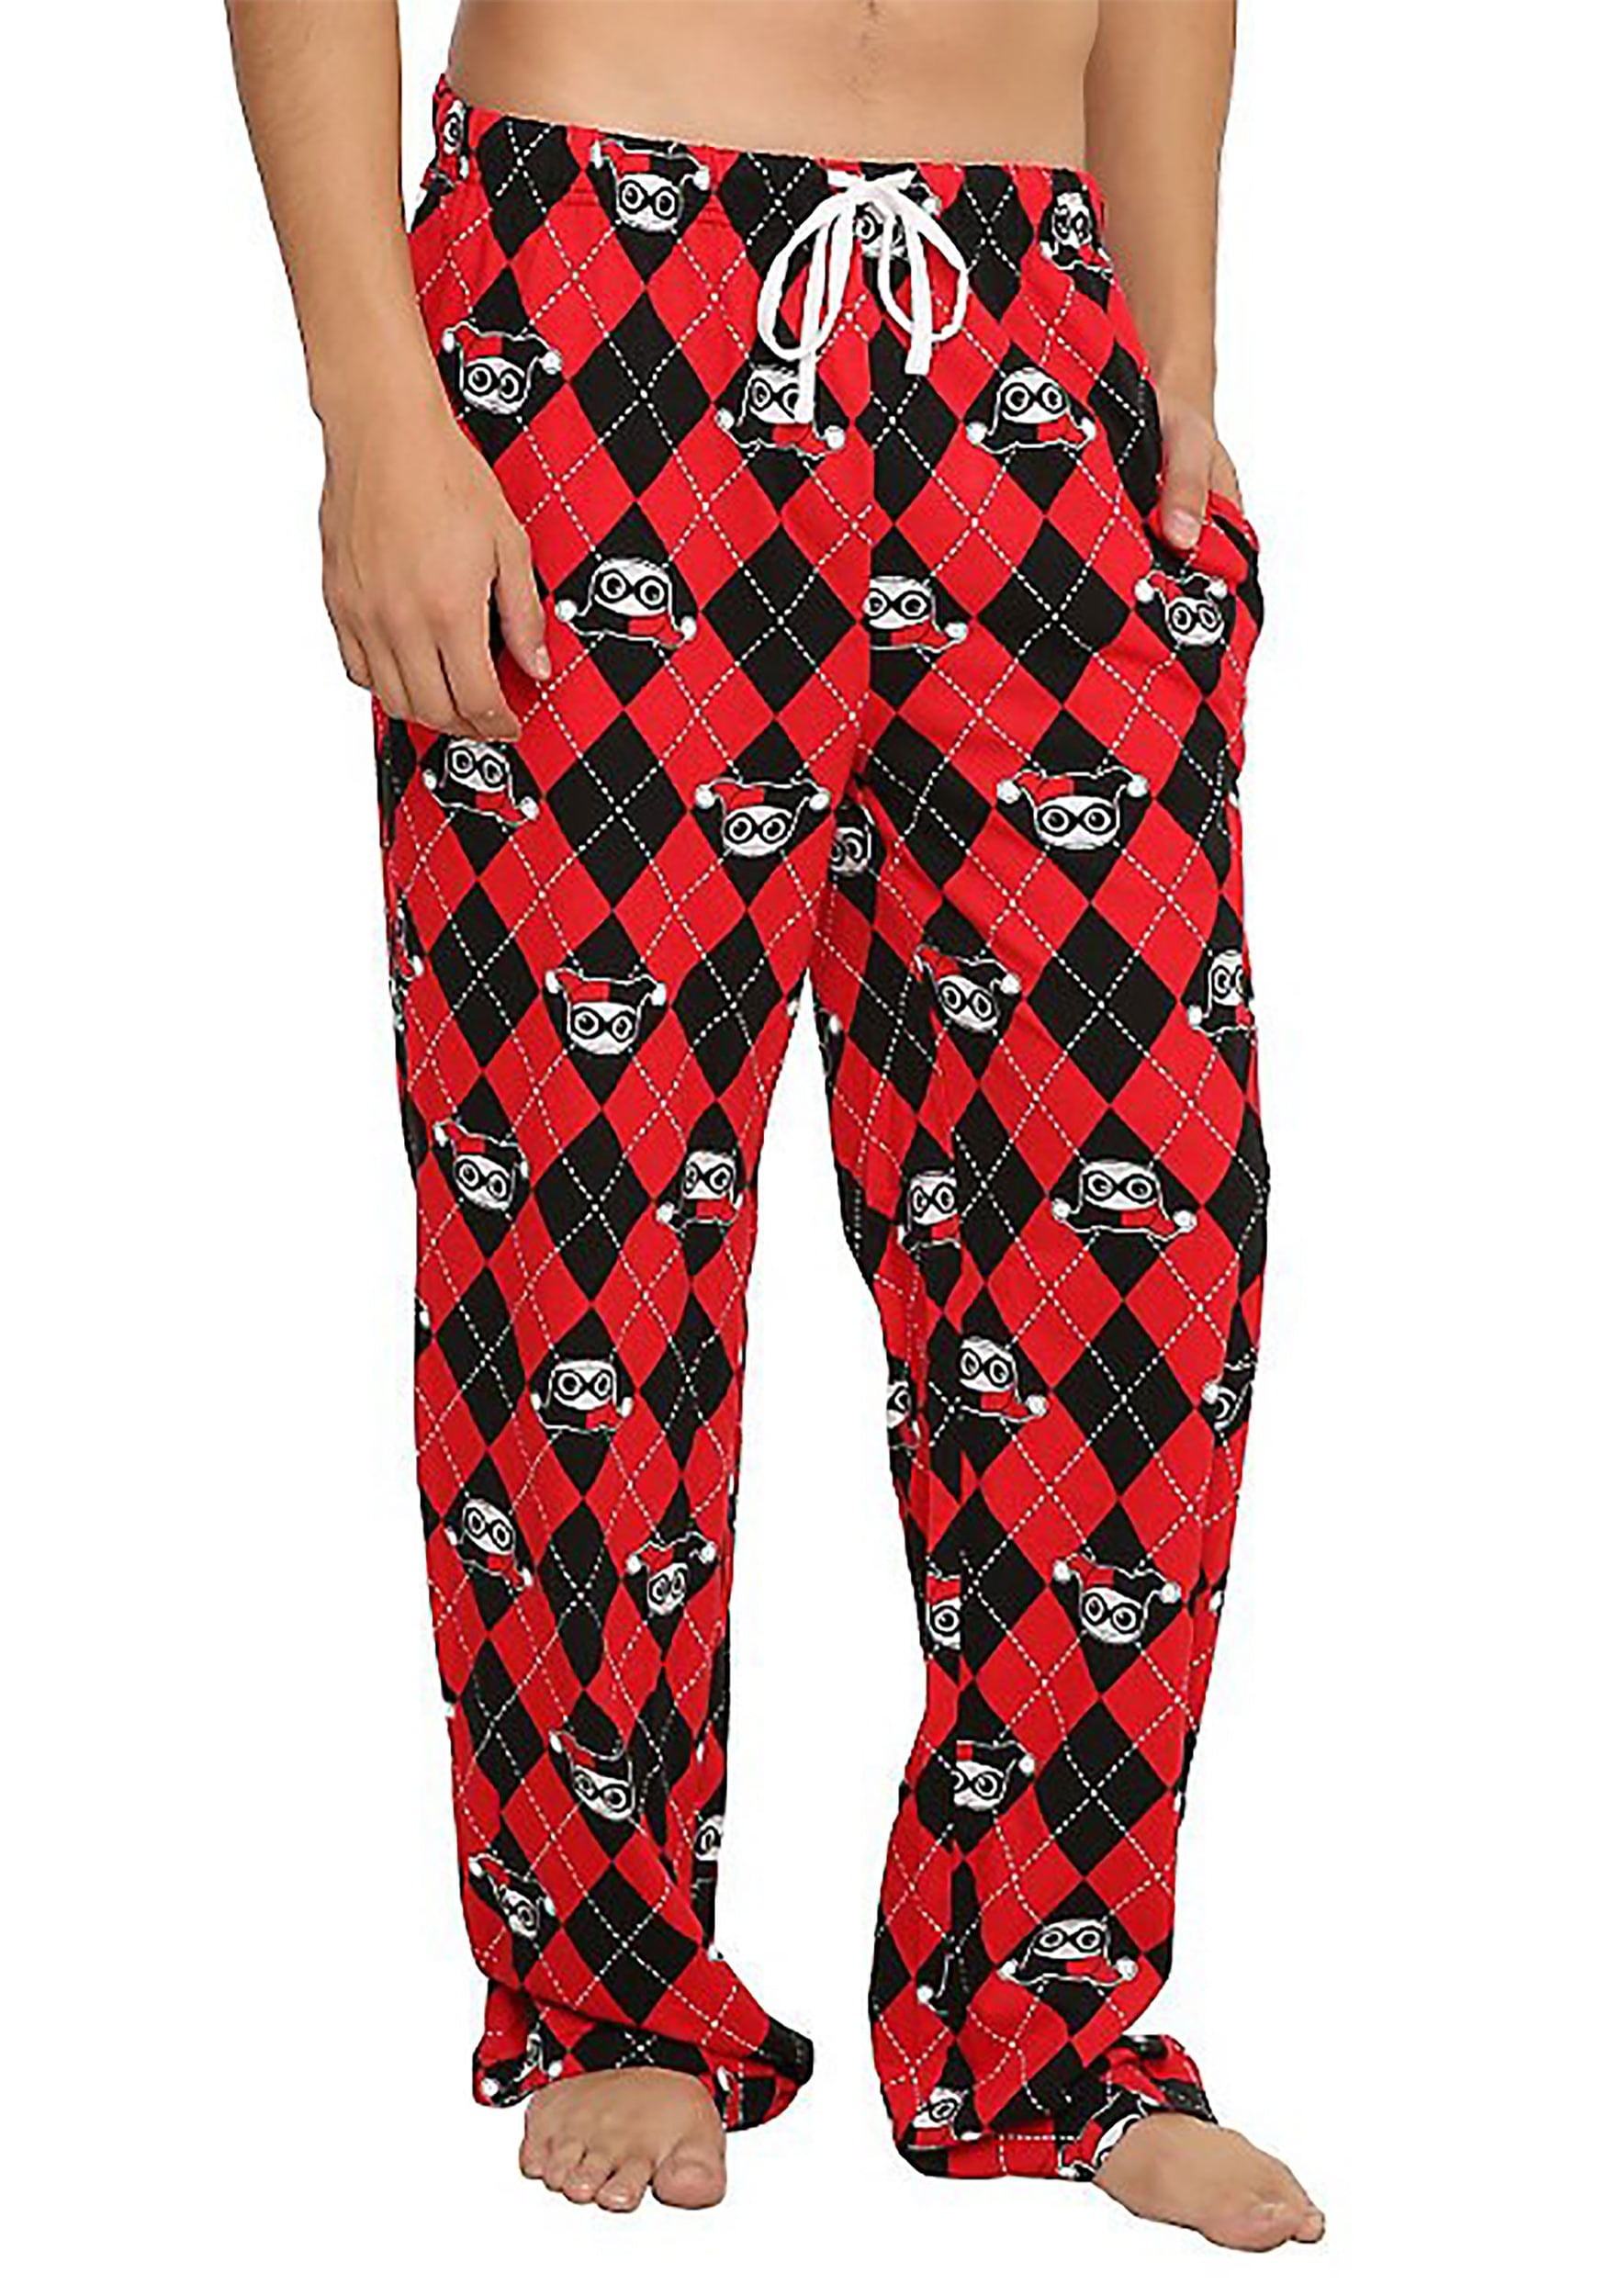 NWT DC Harley Quinn Red And Black Girls One Piece Pajamas Size 4 5 6 6X 7 8 